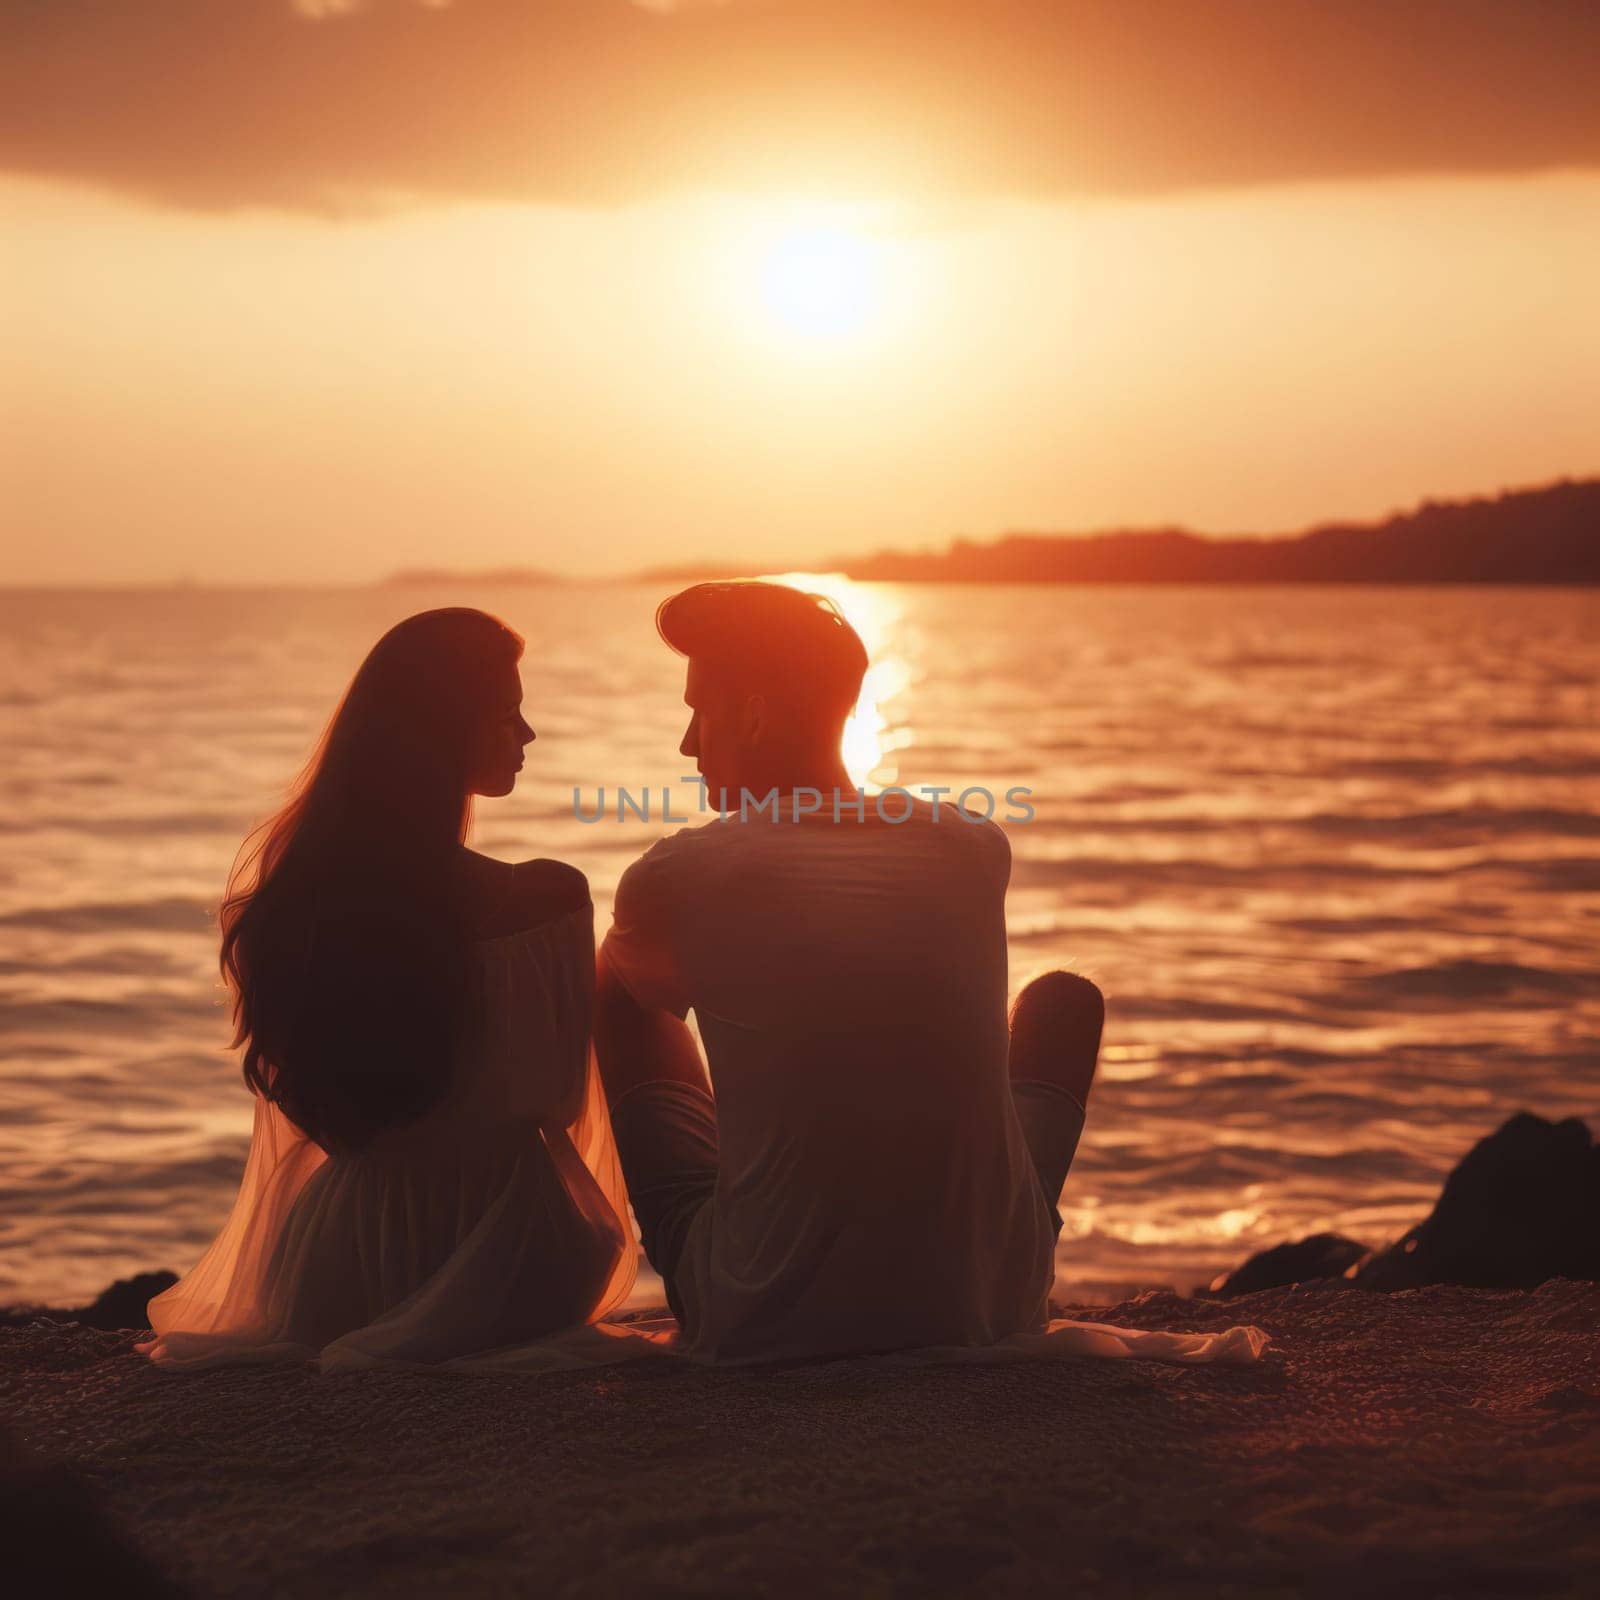 Silhouetted couple enjoying a serene sunset by the sea, creating a romantic and peaceful scene